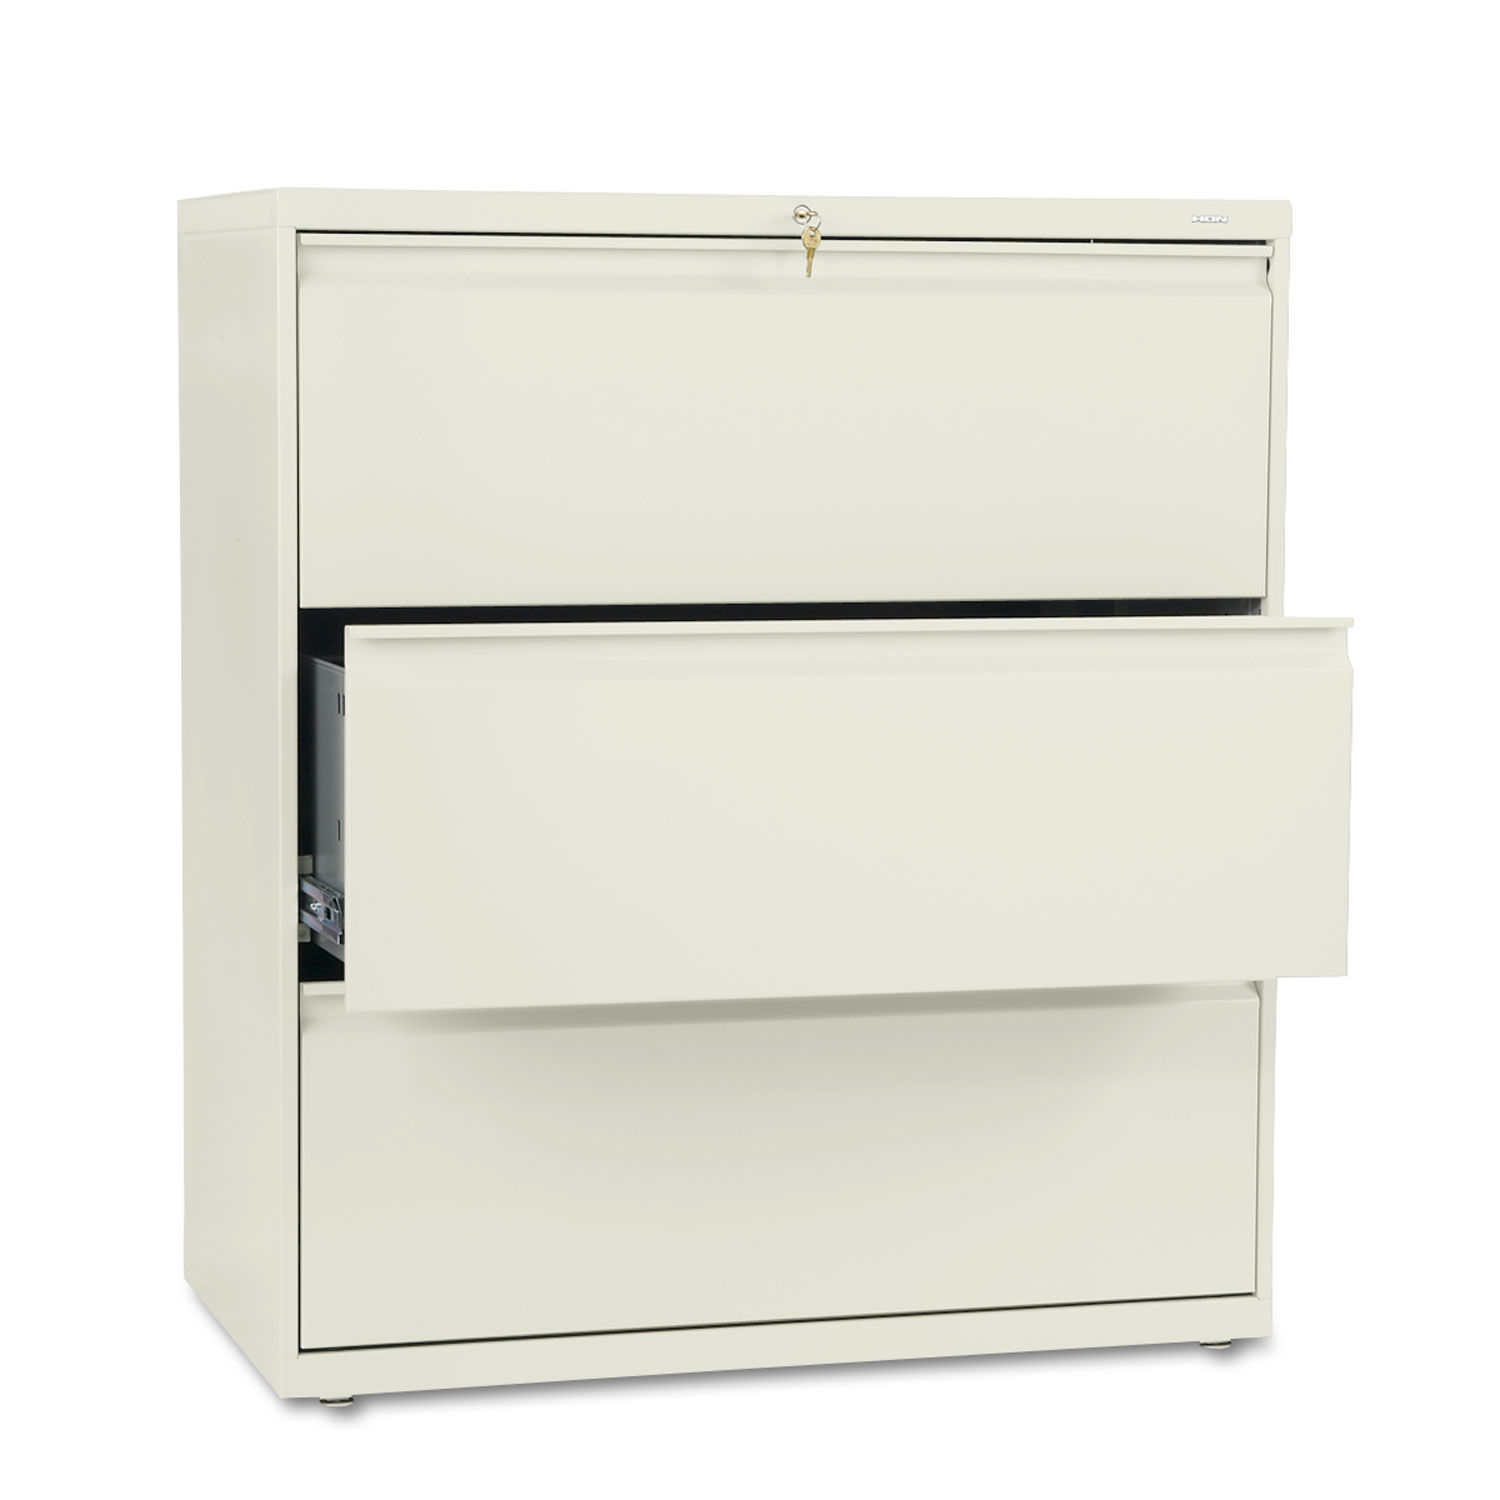 800 Series Three-Drawer Lateral File 36w x 19-1/4d x 40-7/8h, Putty